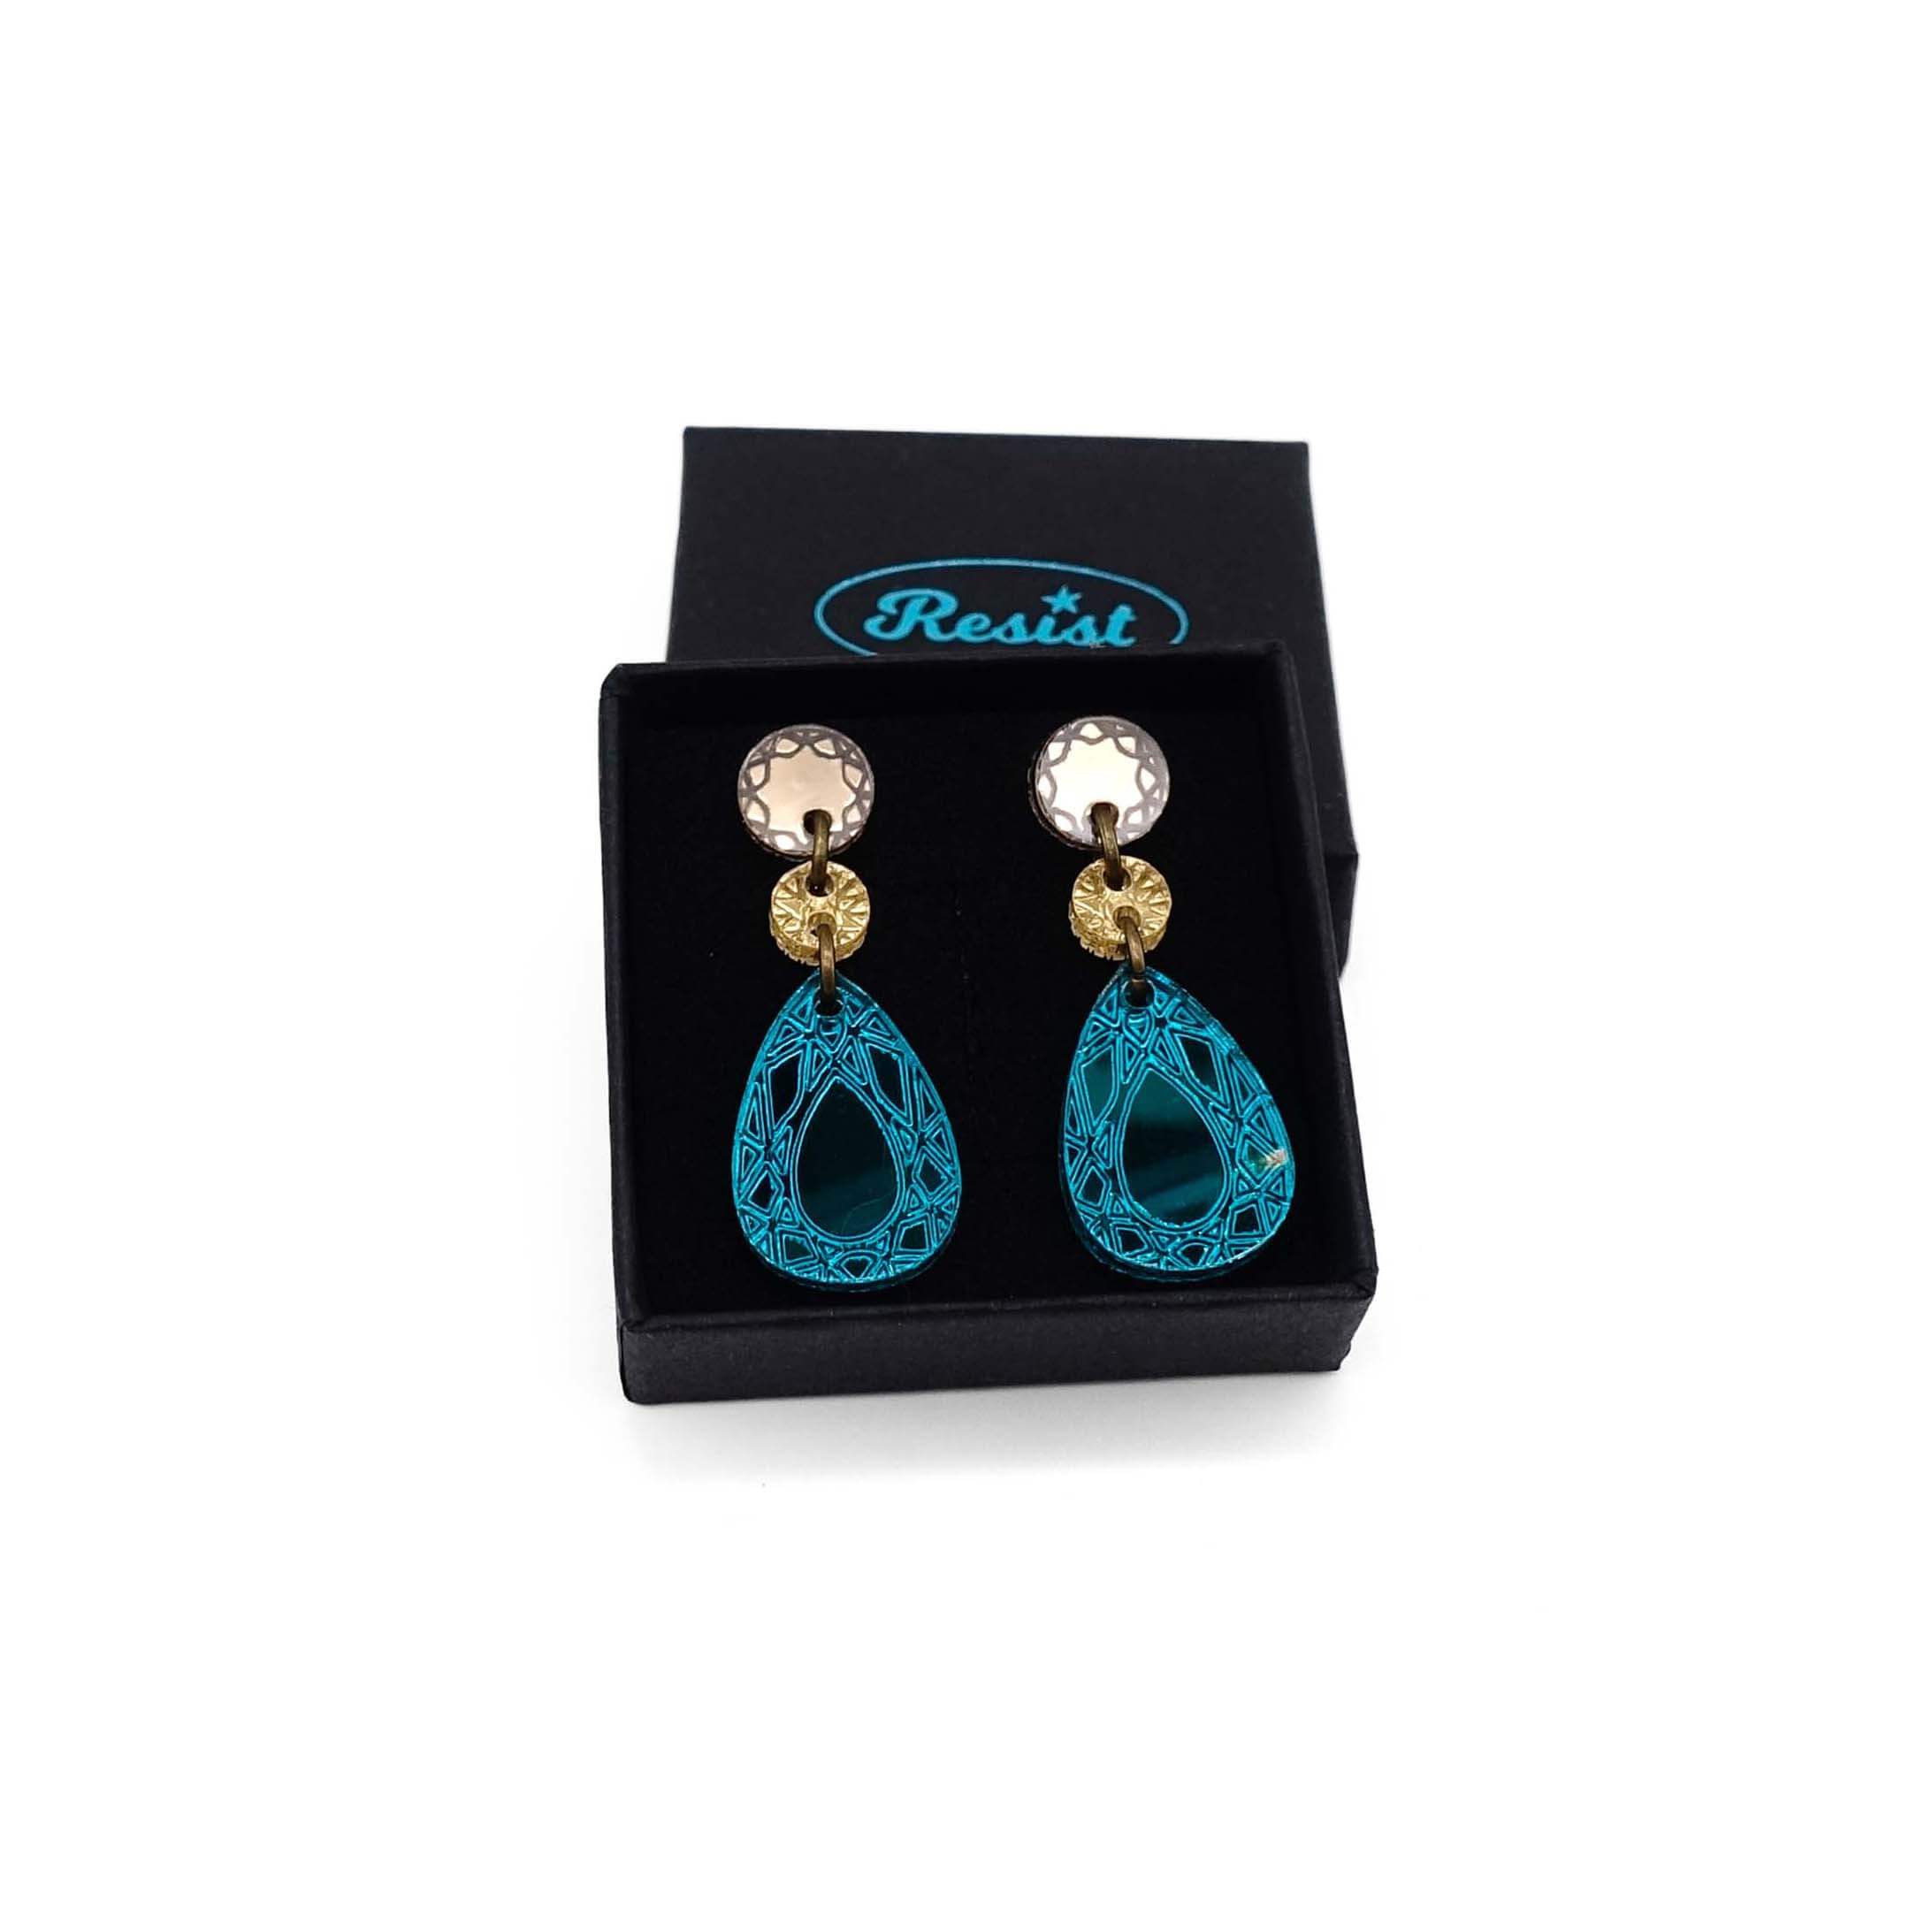 Belle Époque french drop earrings in teal mirror, shown in a Wear and Resist gift box. 